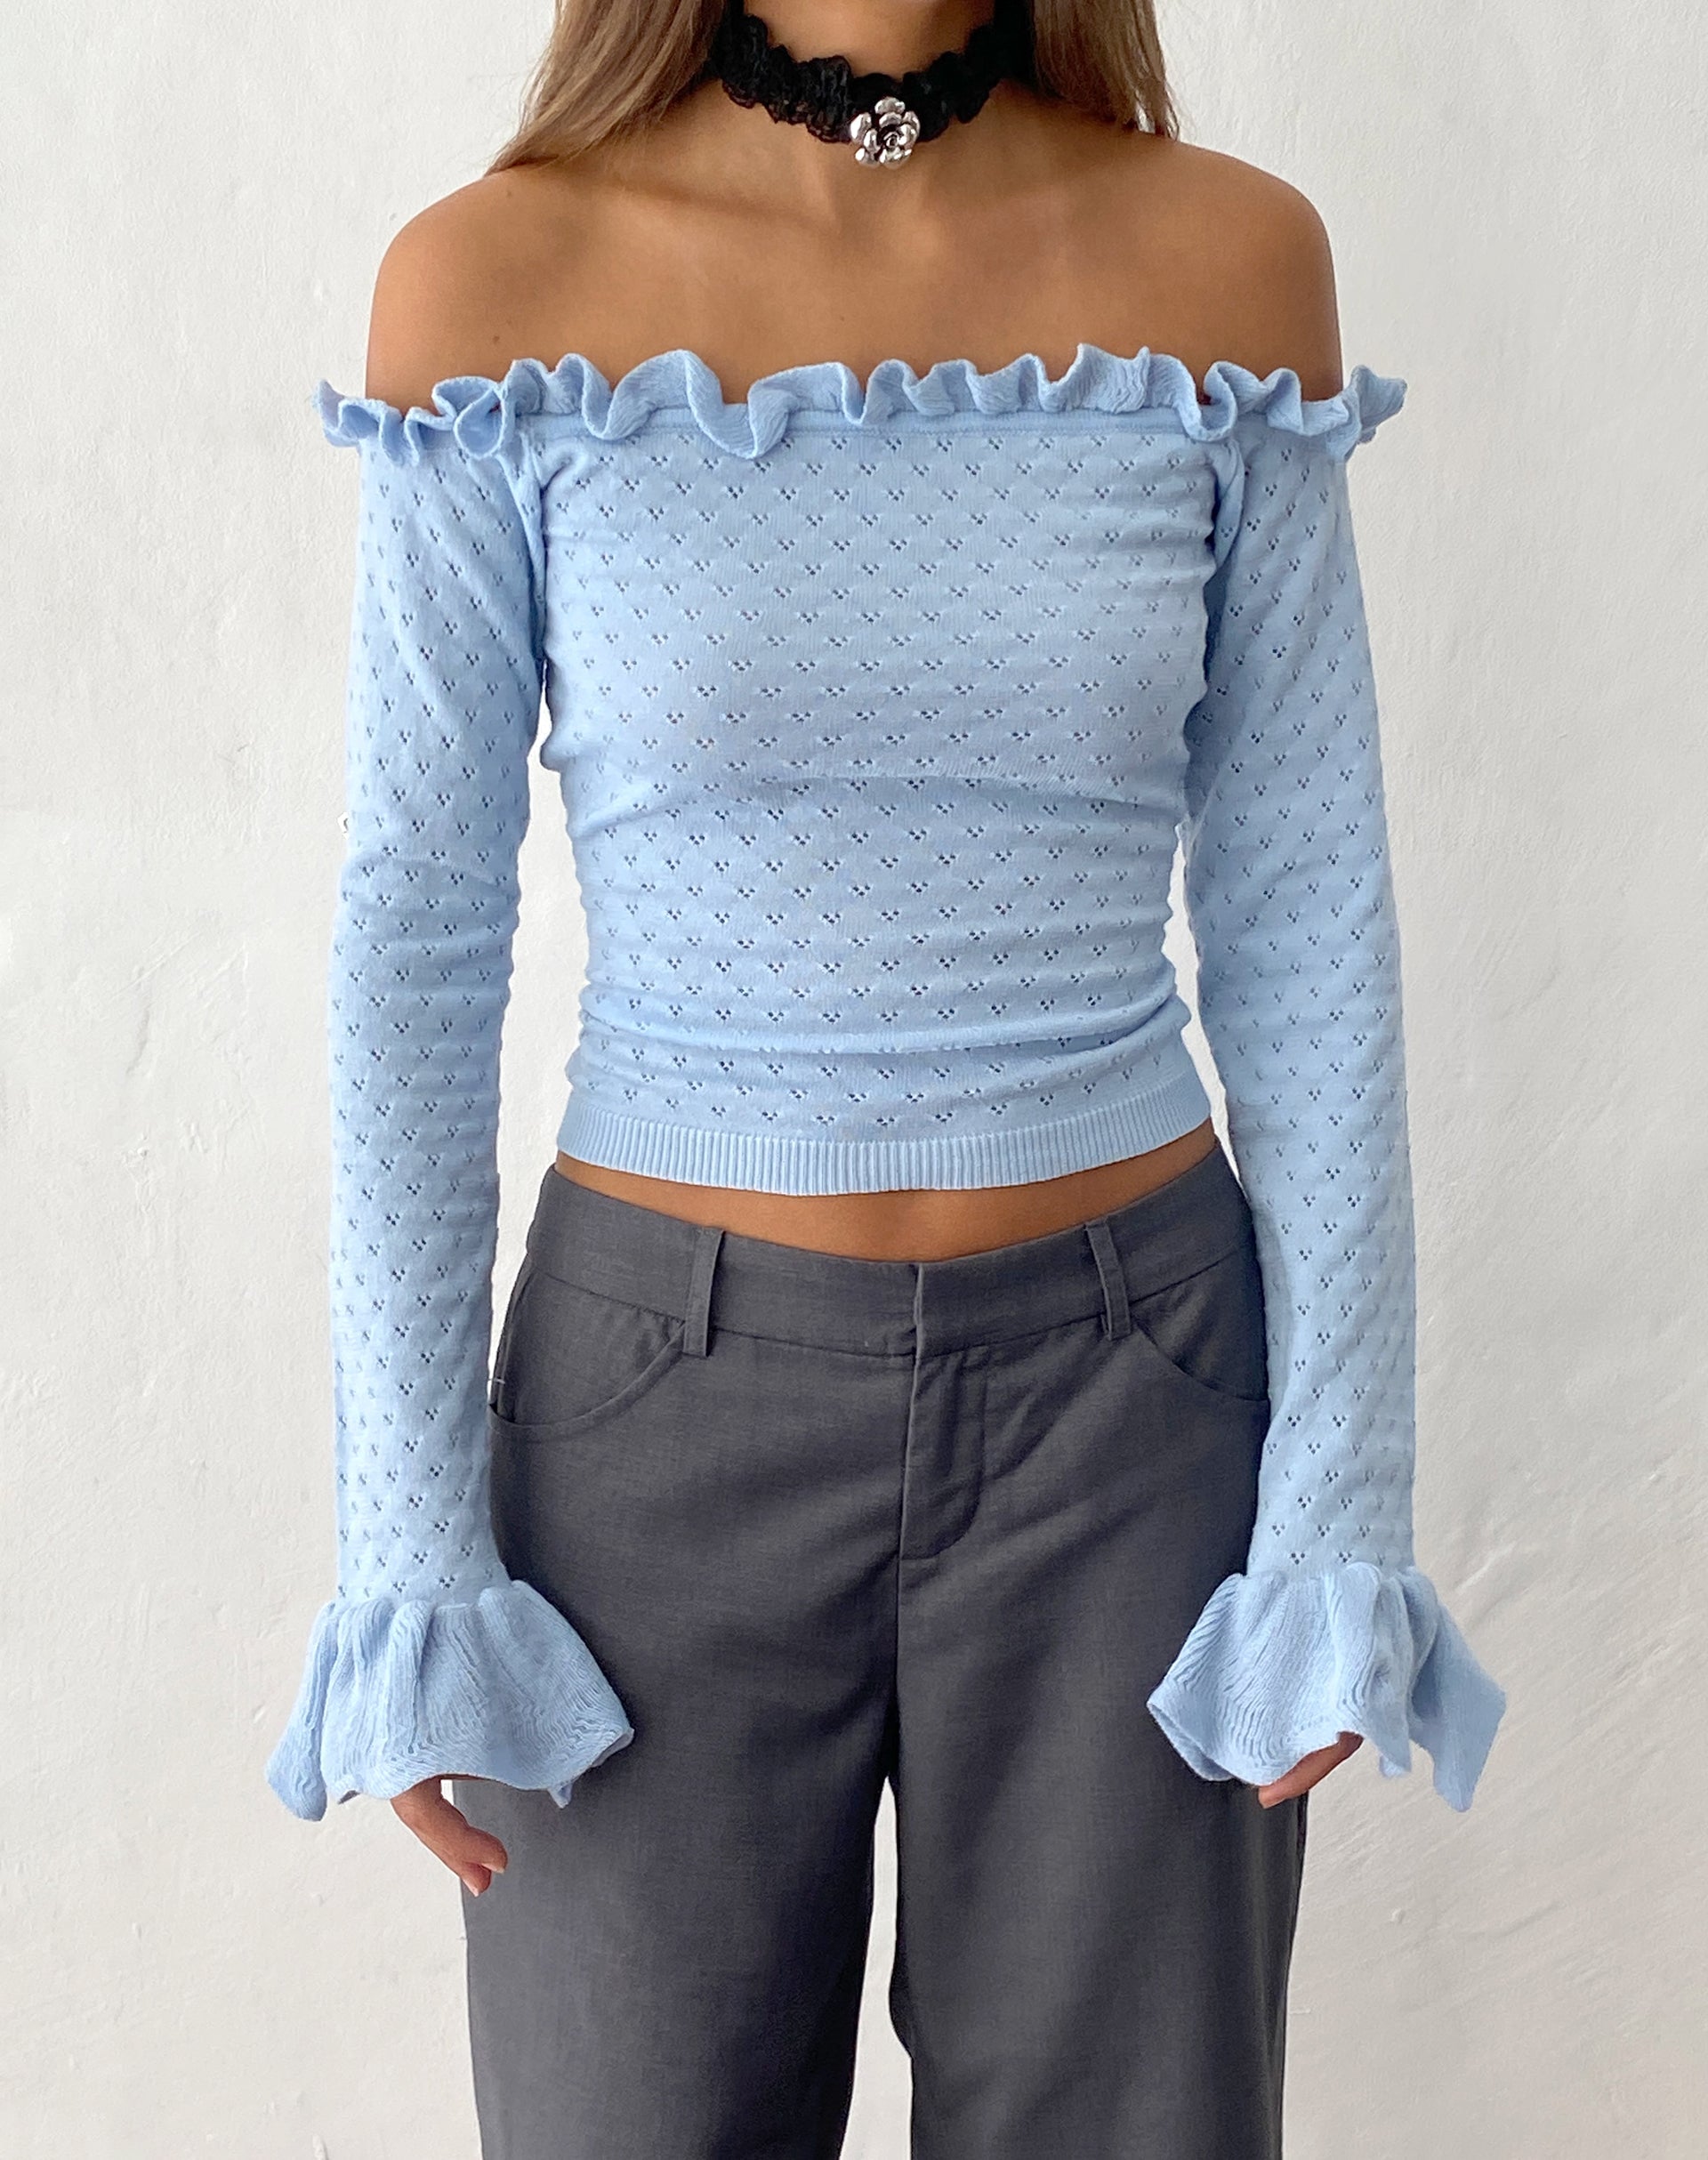 Image of Delaney Knitted Frill Bardot Top in Baby Blue